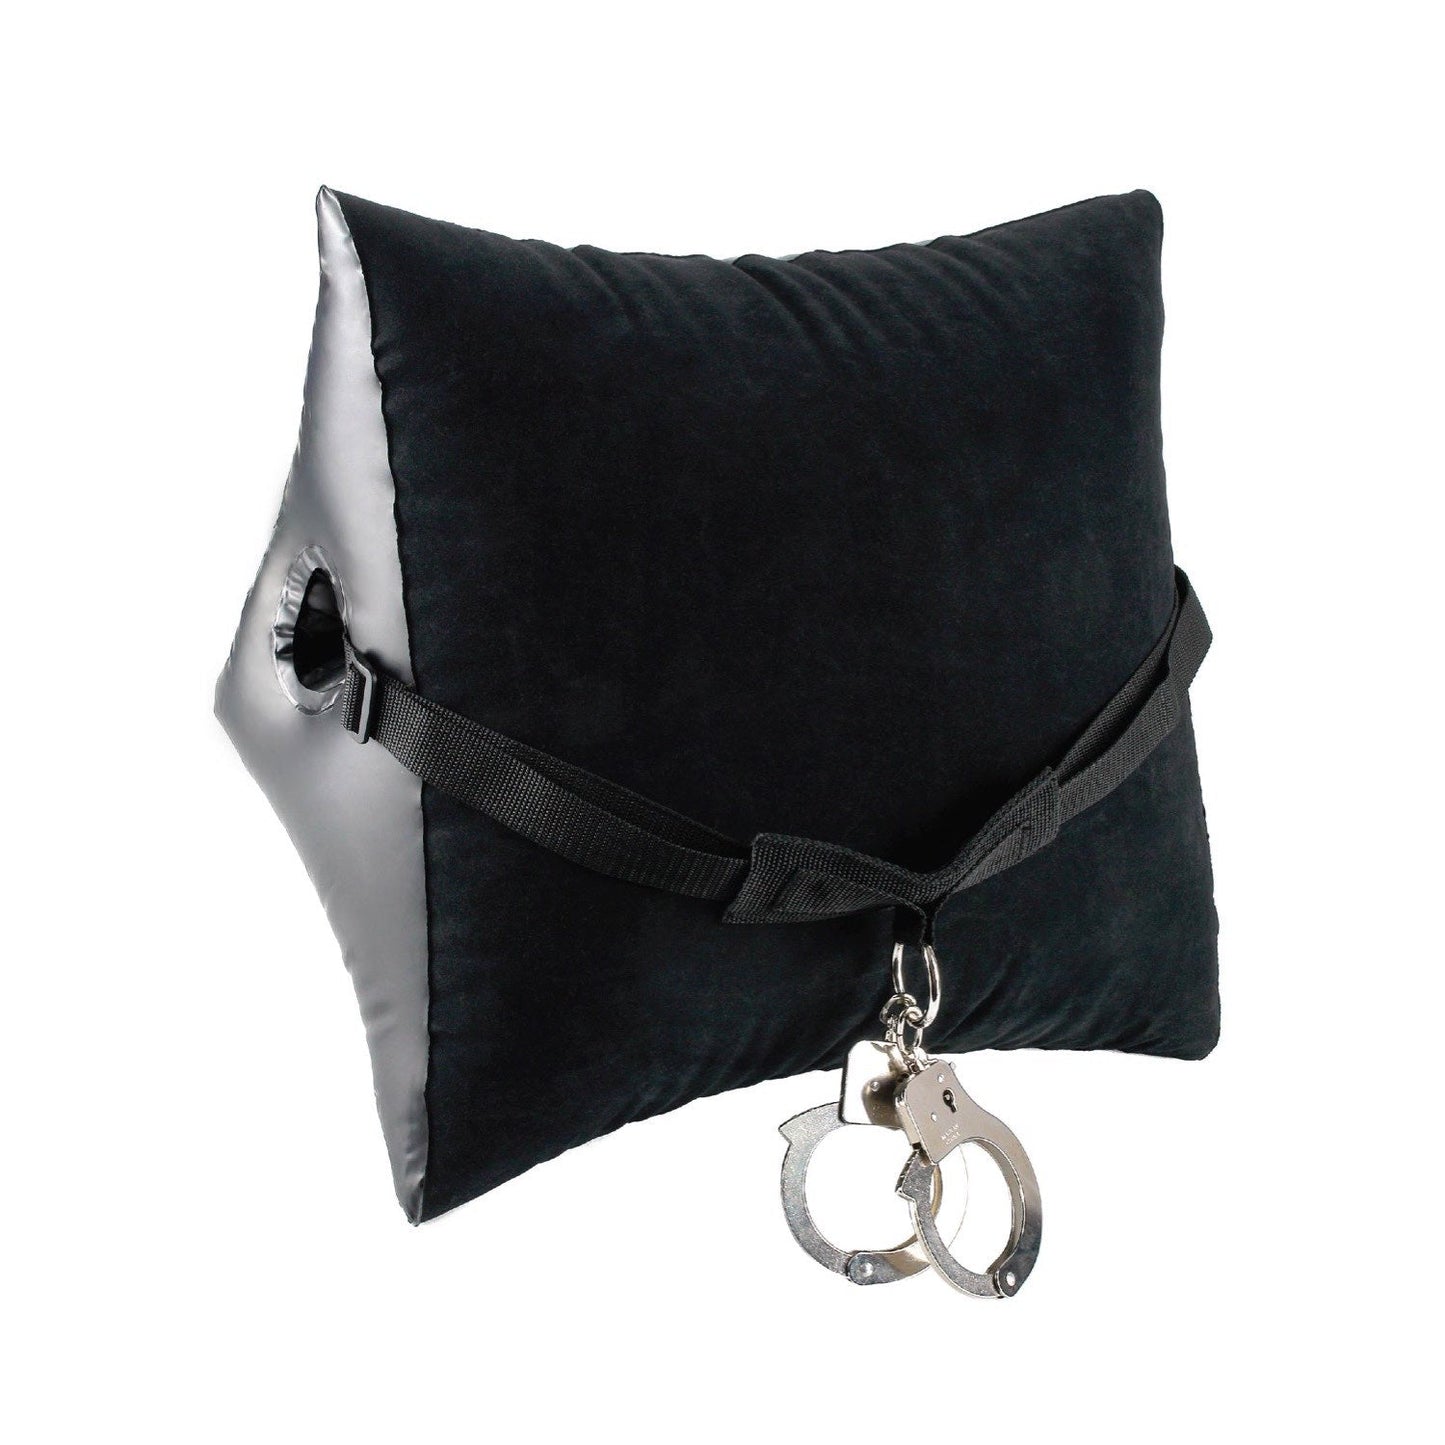 Deluxe Position Master With Cuffs - Black Inflatable Cushion